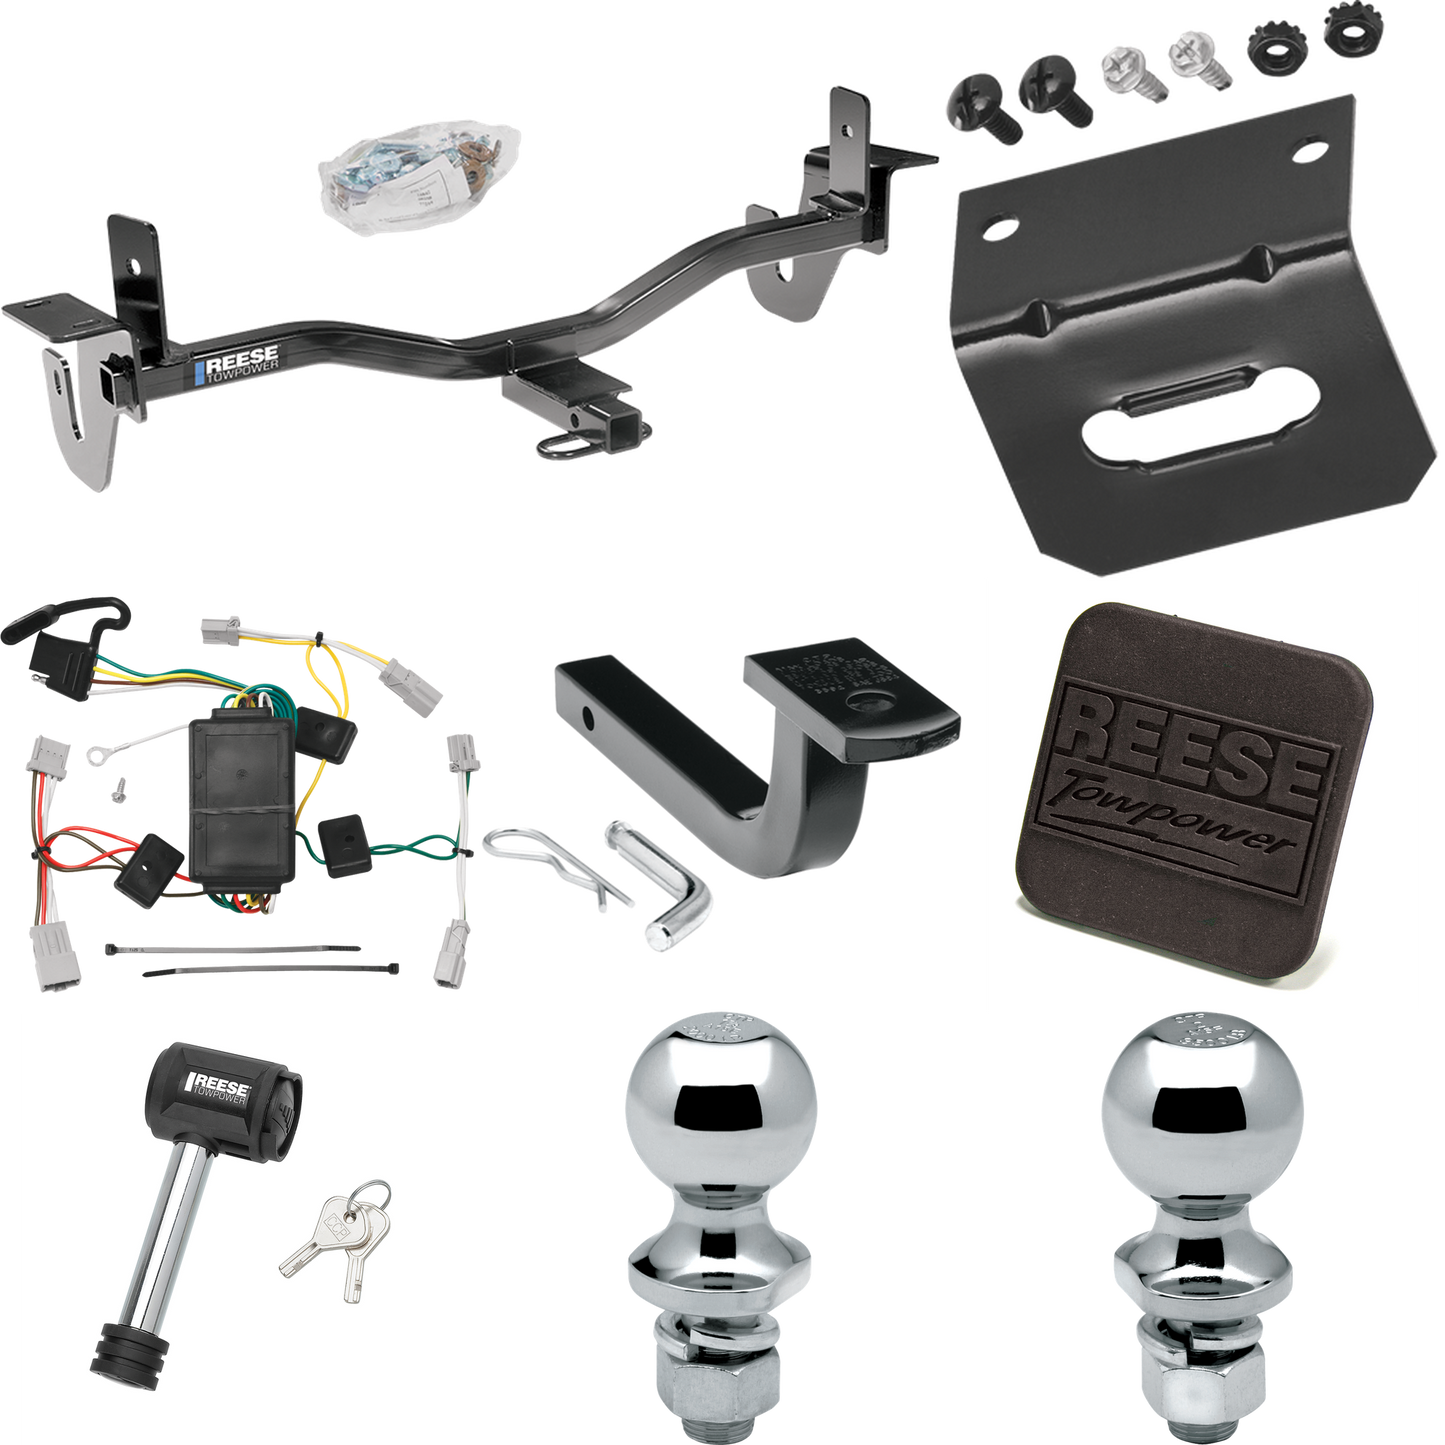 Fits 2010-2013 Mazda 3 Trailer Hitch Tow PKG w/ 4-Flat Wiring Harness + Draw-Bar + 1-7/8" + 2" Ball + Wiring Bracket + Hitch Cover + Hitch Lock (For Sedan, Except w/Grand Touring LED Taillights Models) By Reese Towpower